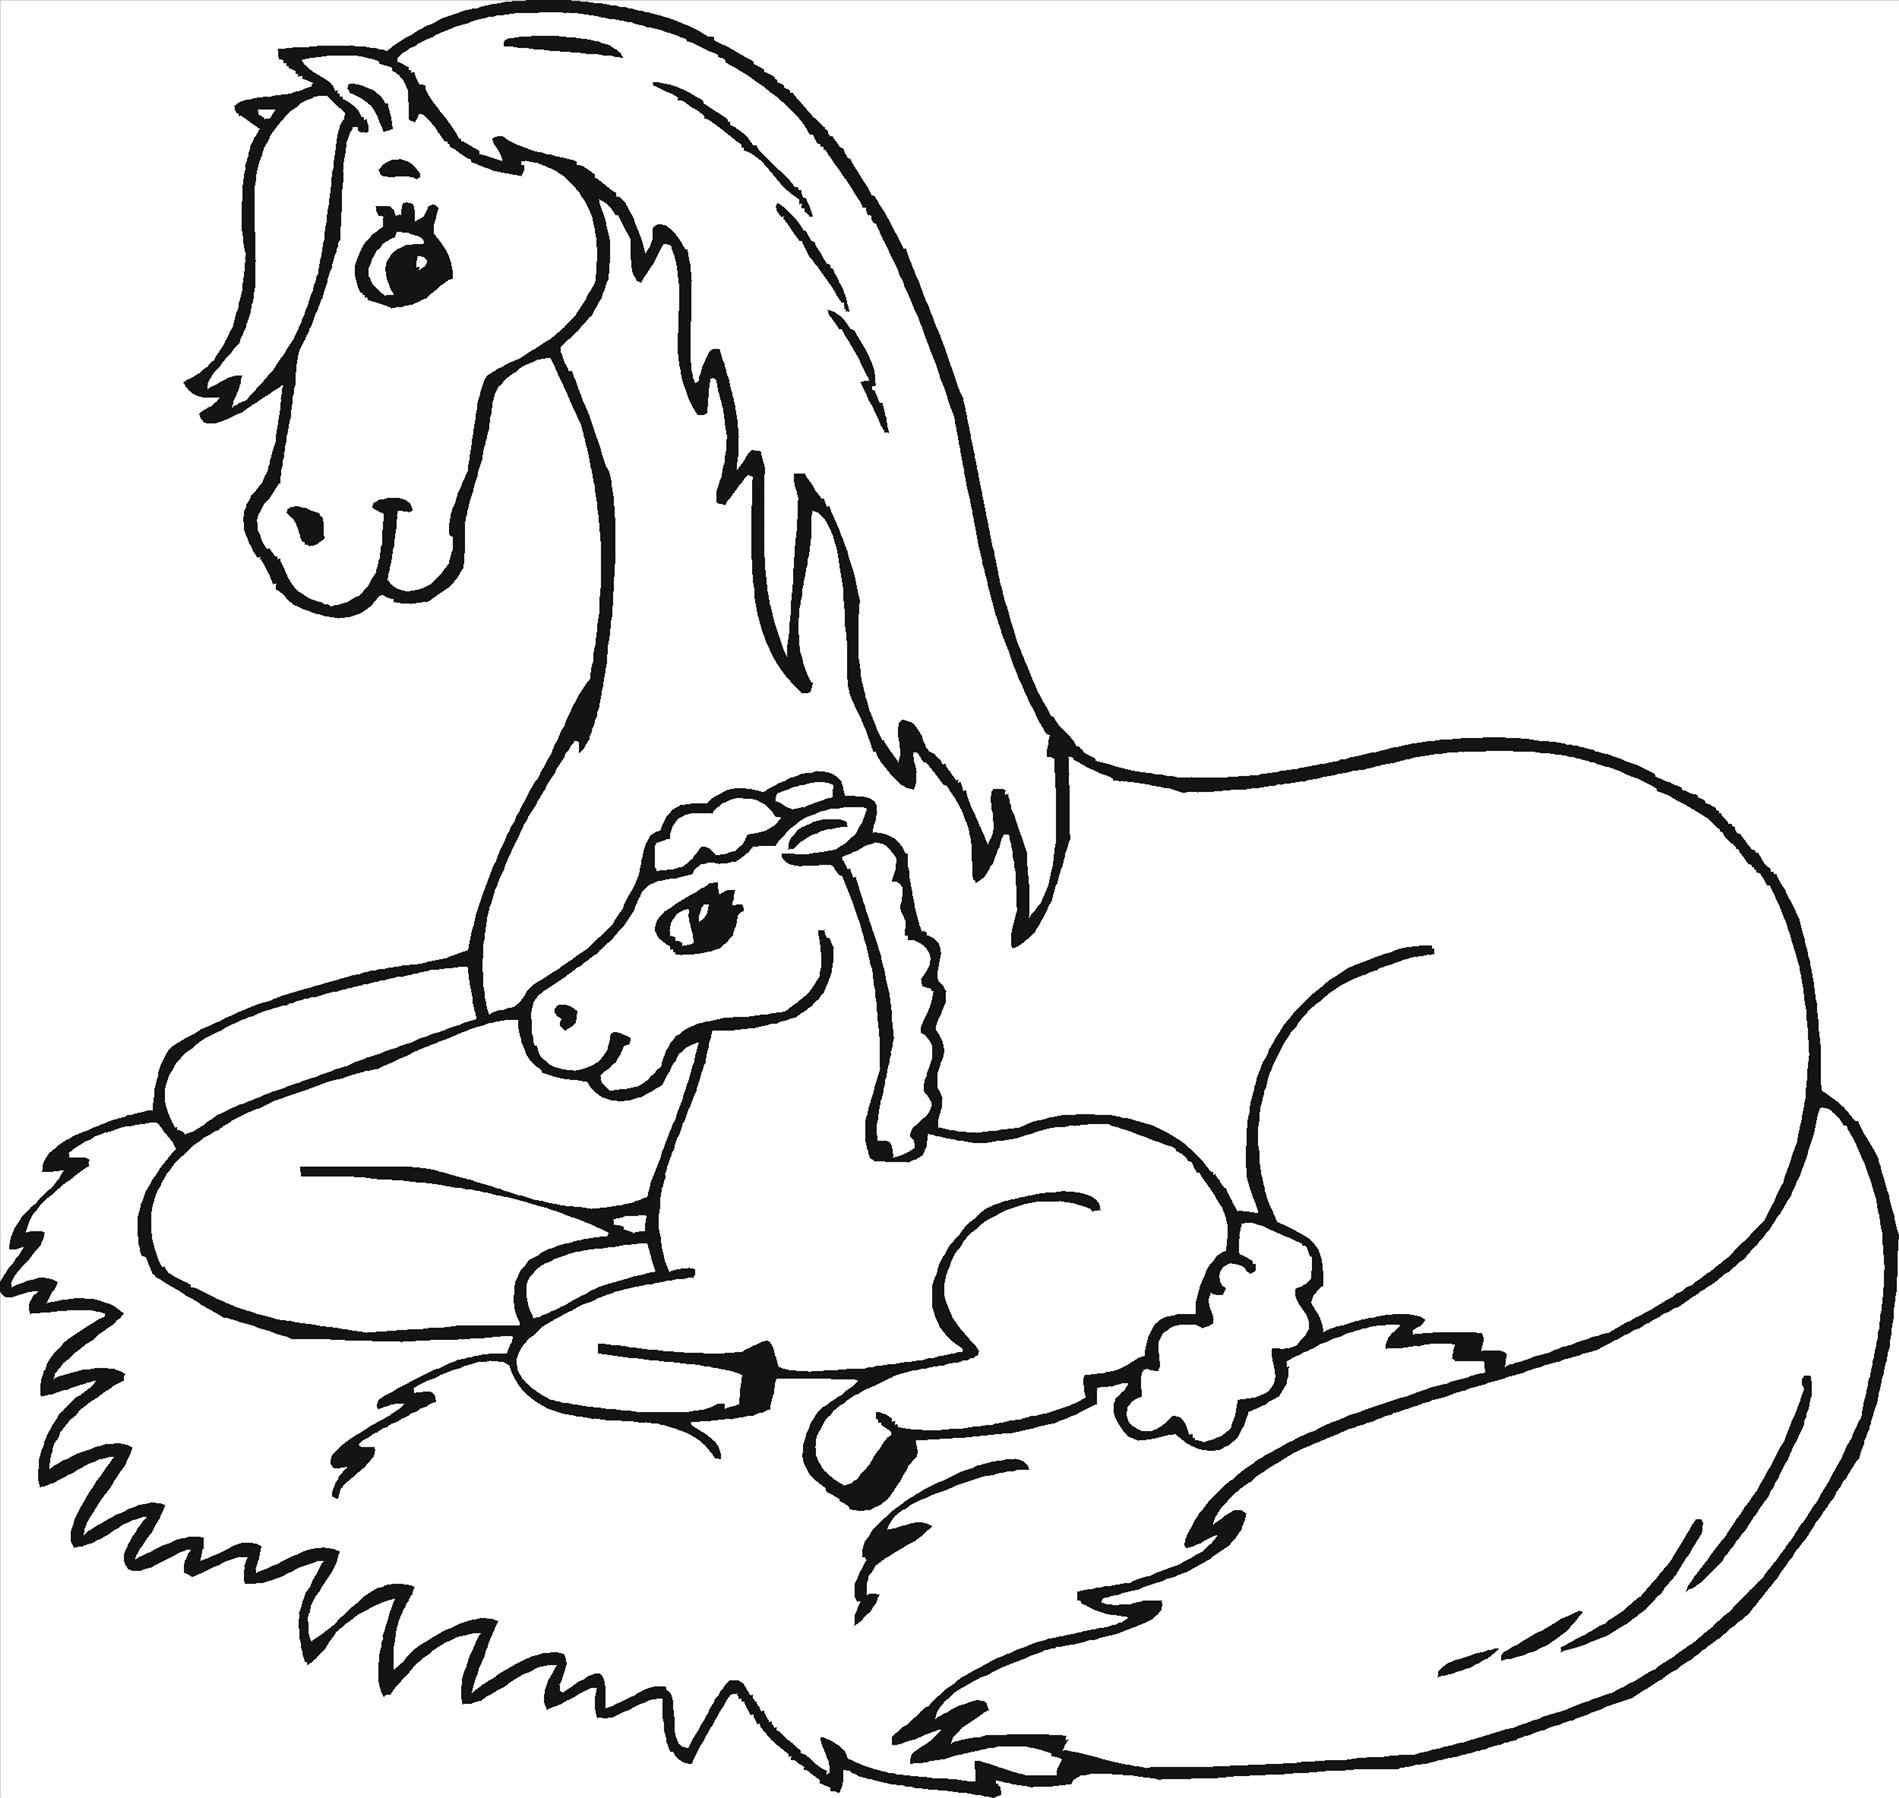 coloring-pages-of-baby-horses-of-coloring-pages-of-baby-horses Coloring Pages Of Baby Horses Animal 